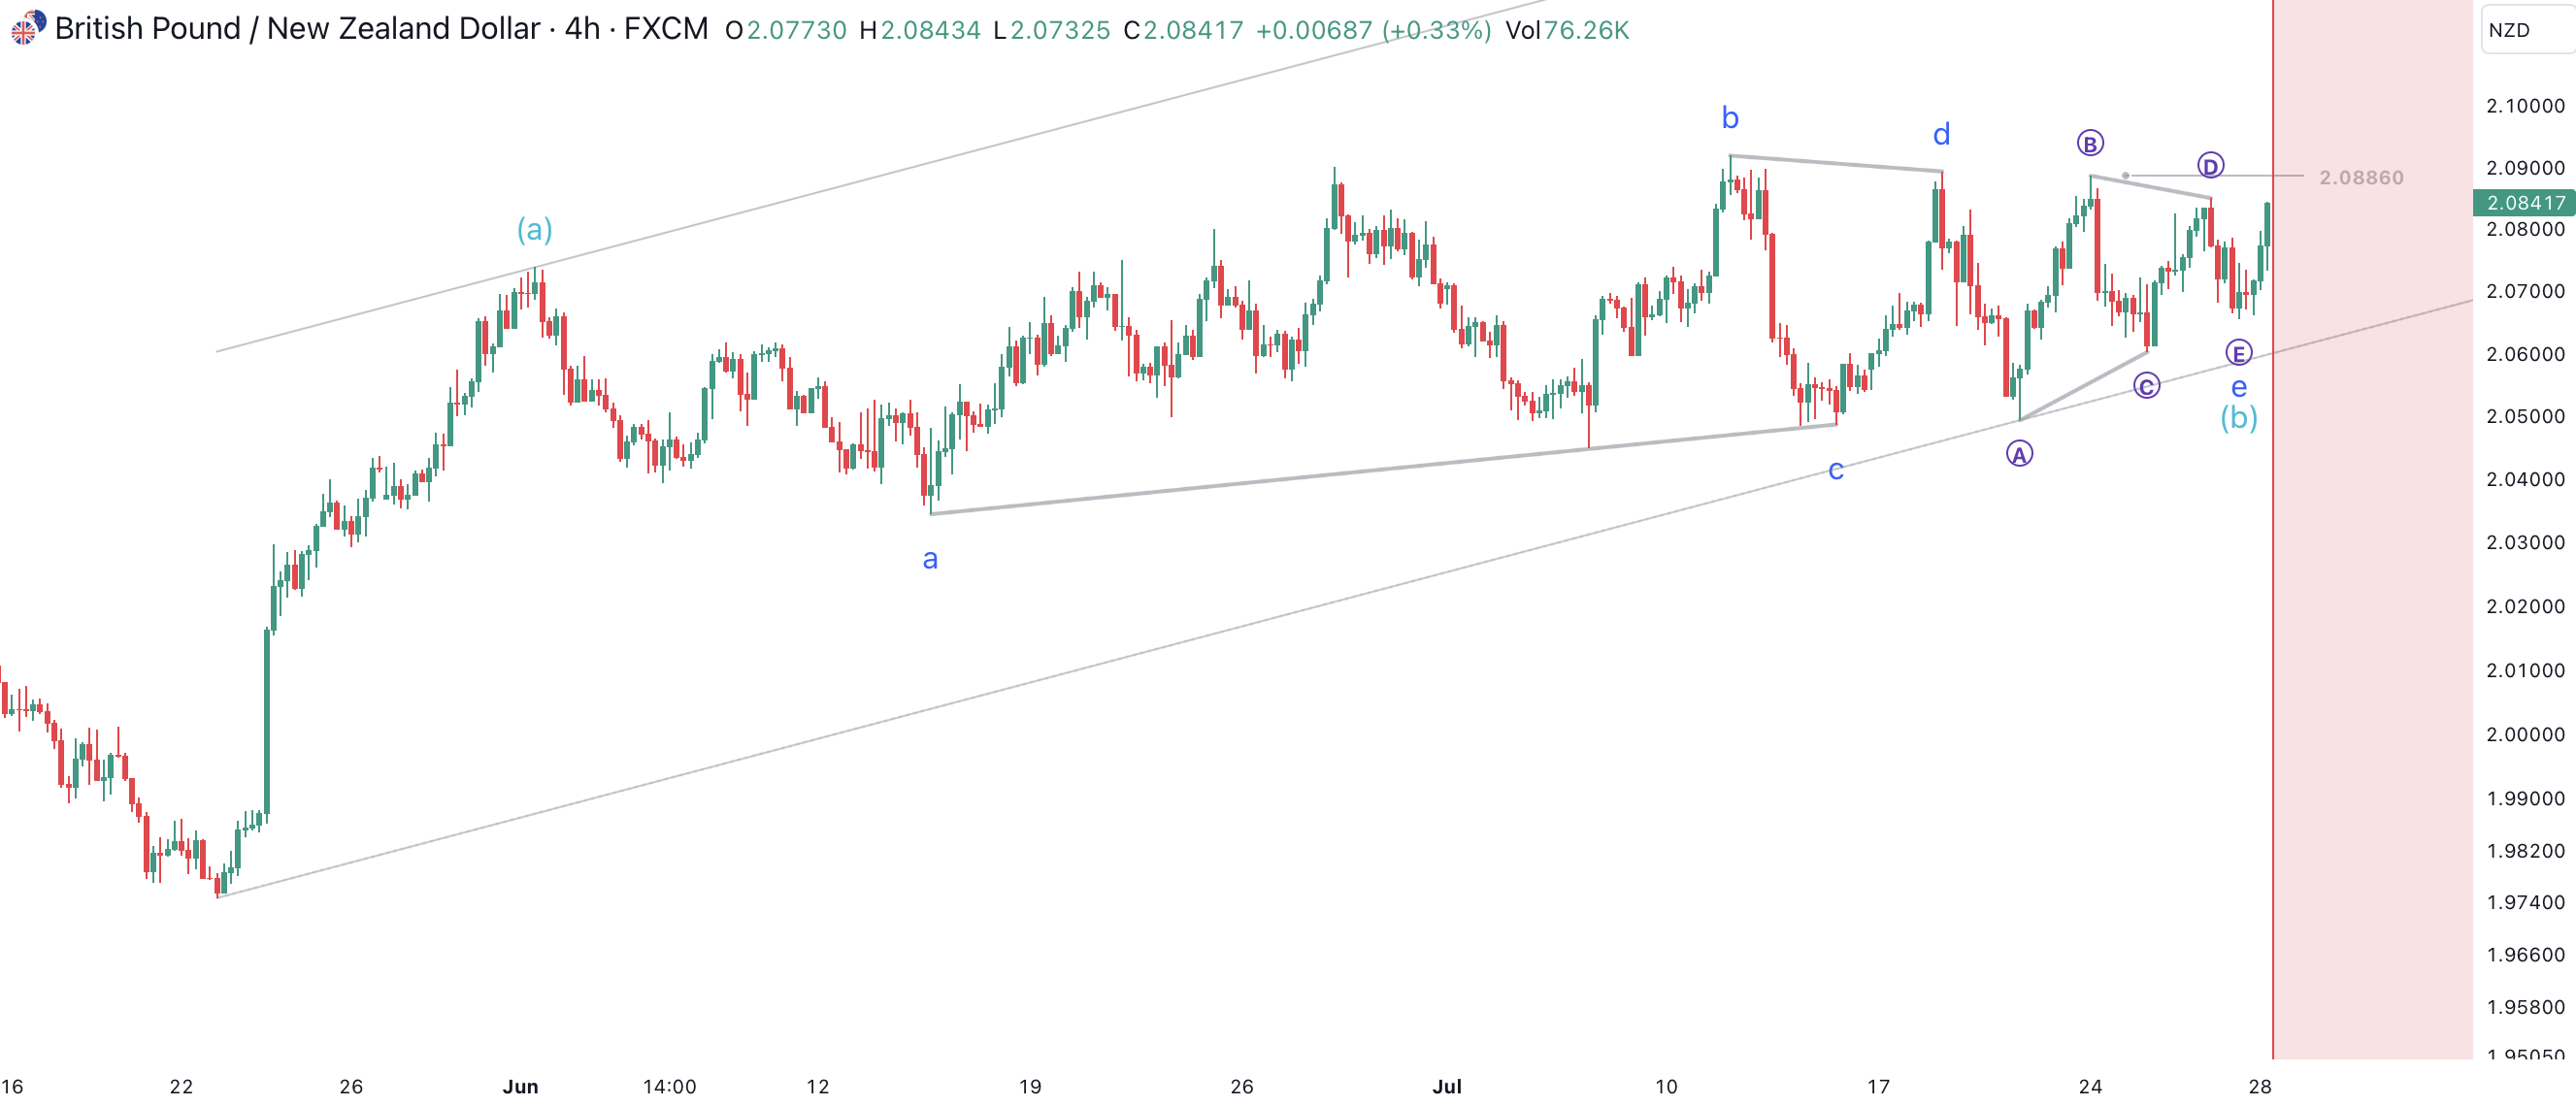 GBPNZD's Triangle within Triangle and the Path to 2.1522 Target